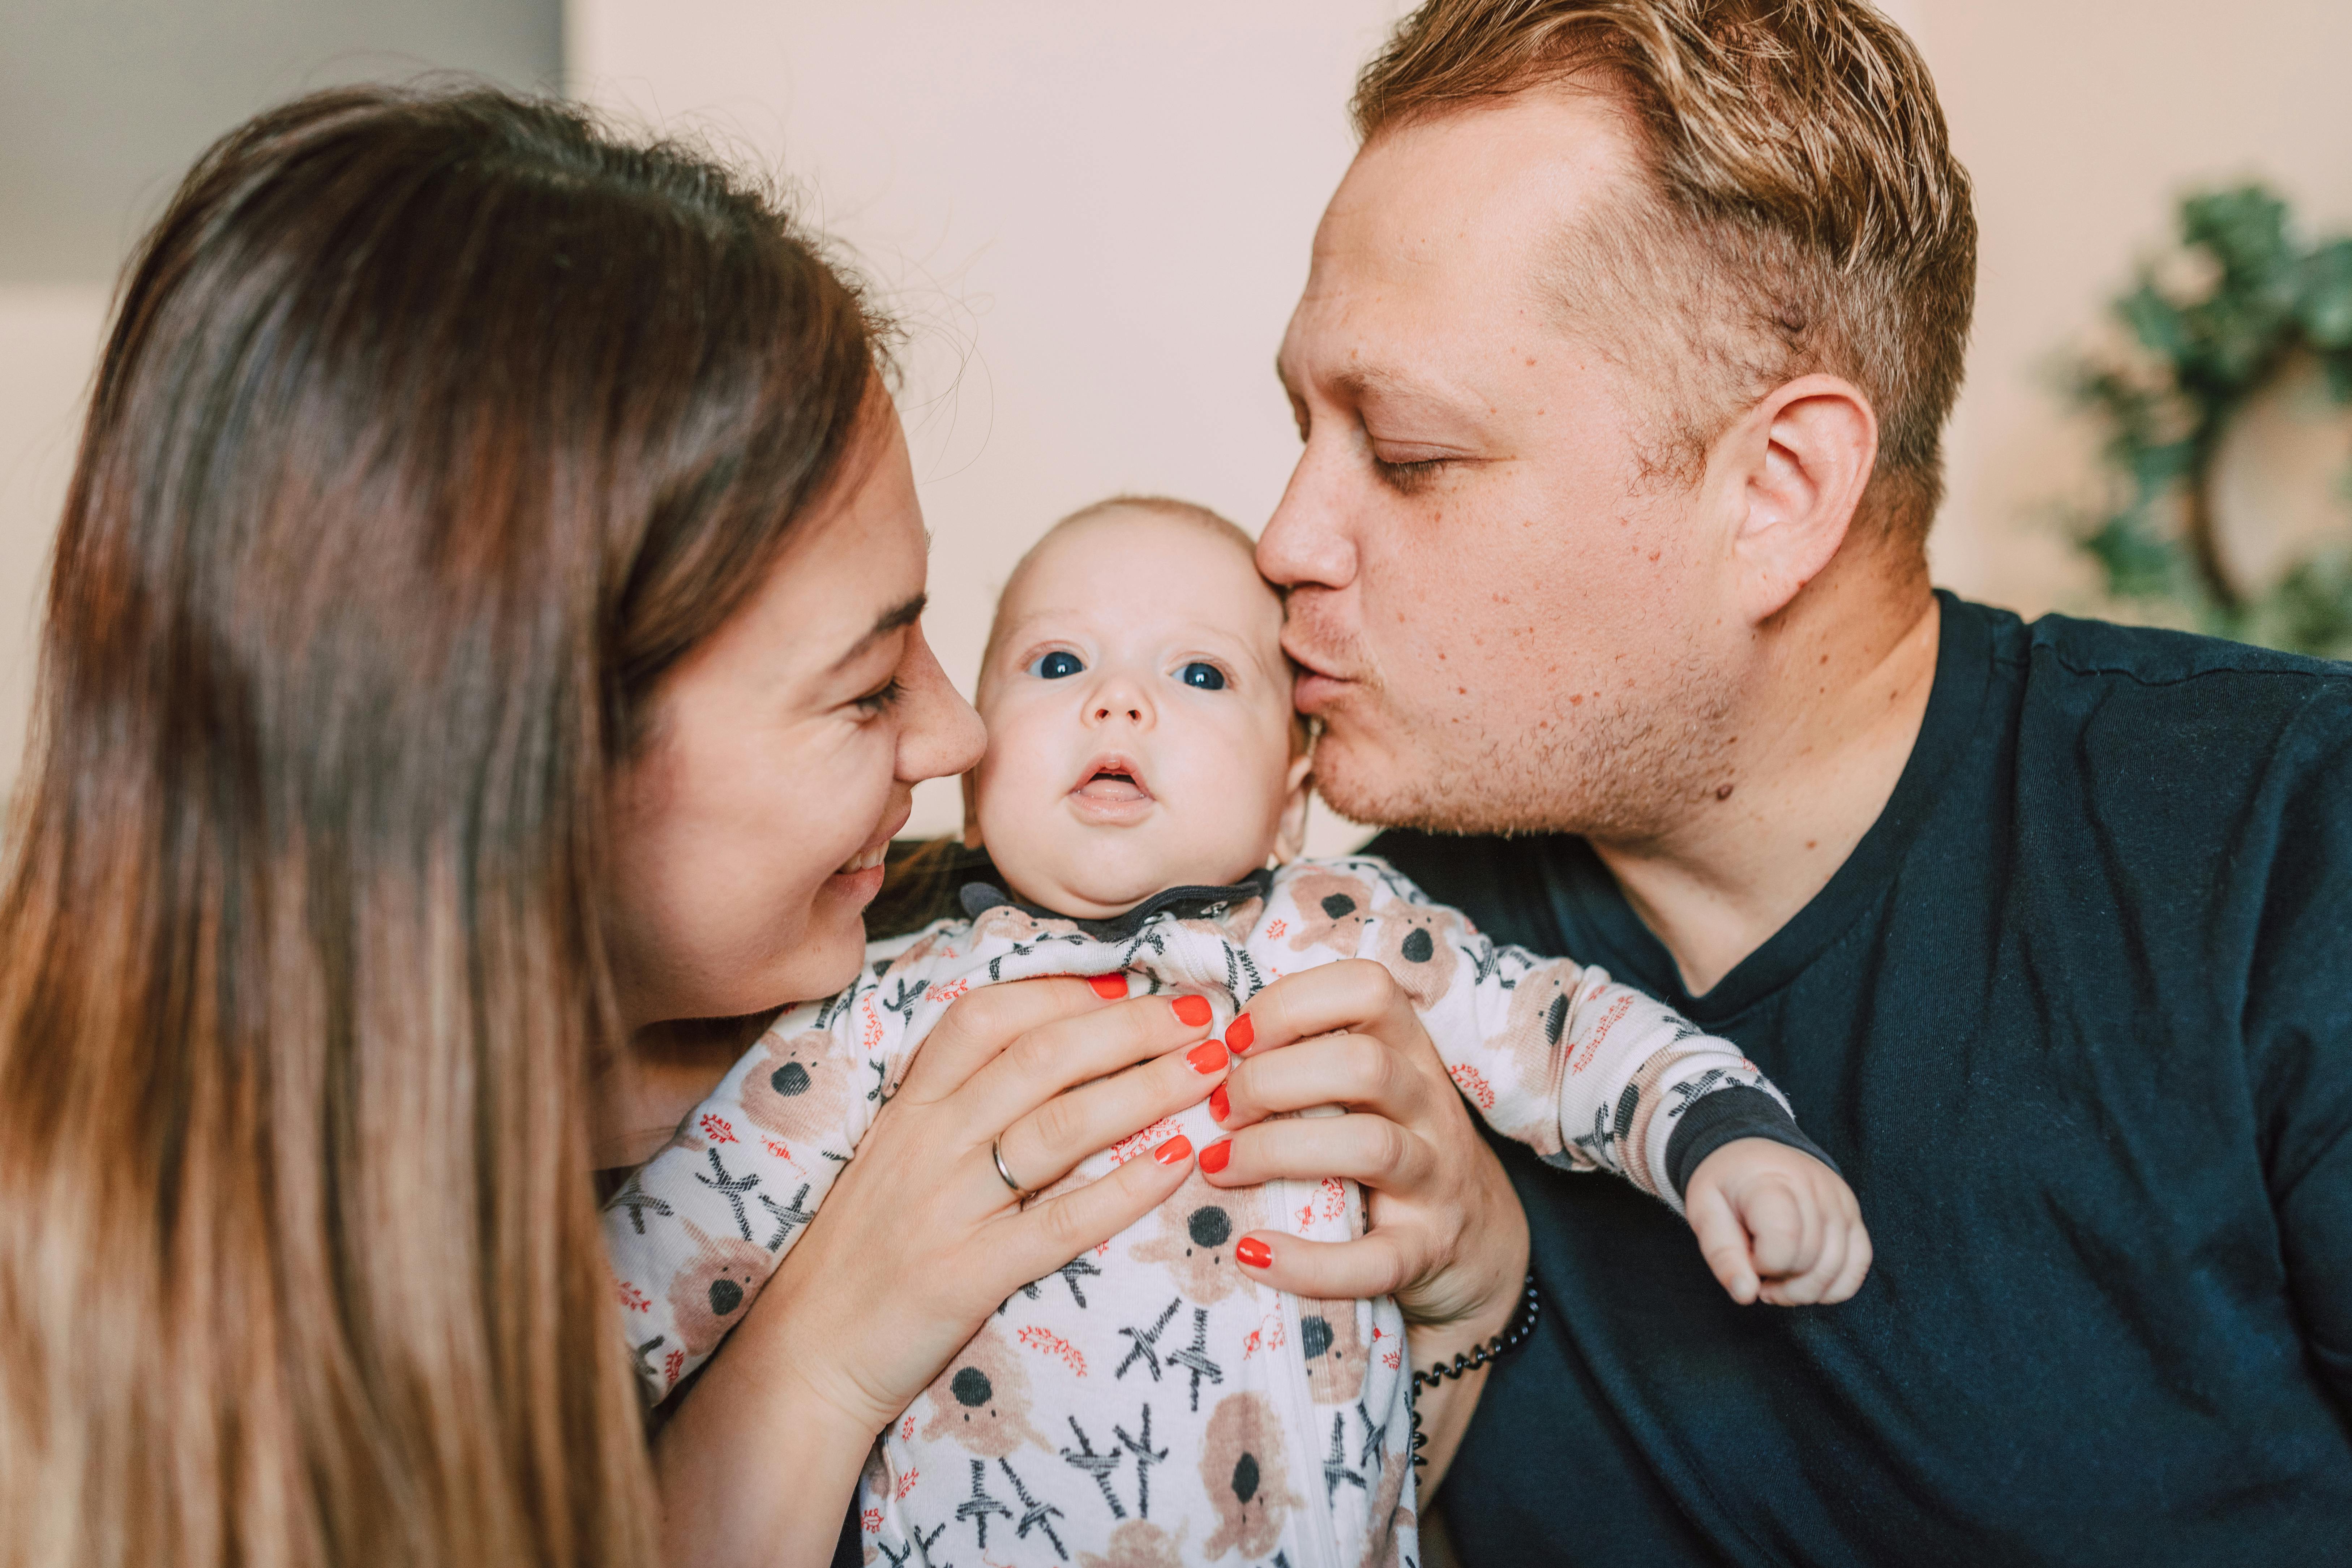 A couple gushing over their newborn baby | Source: Pexels